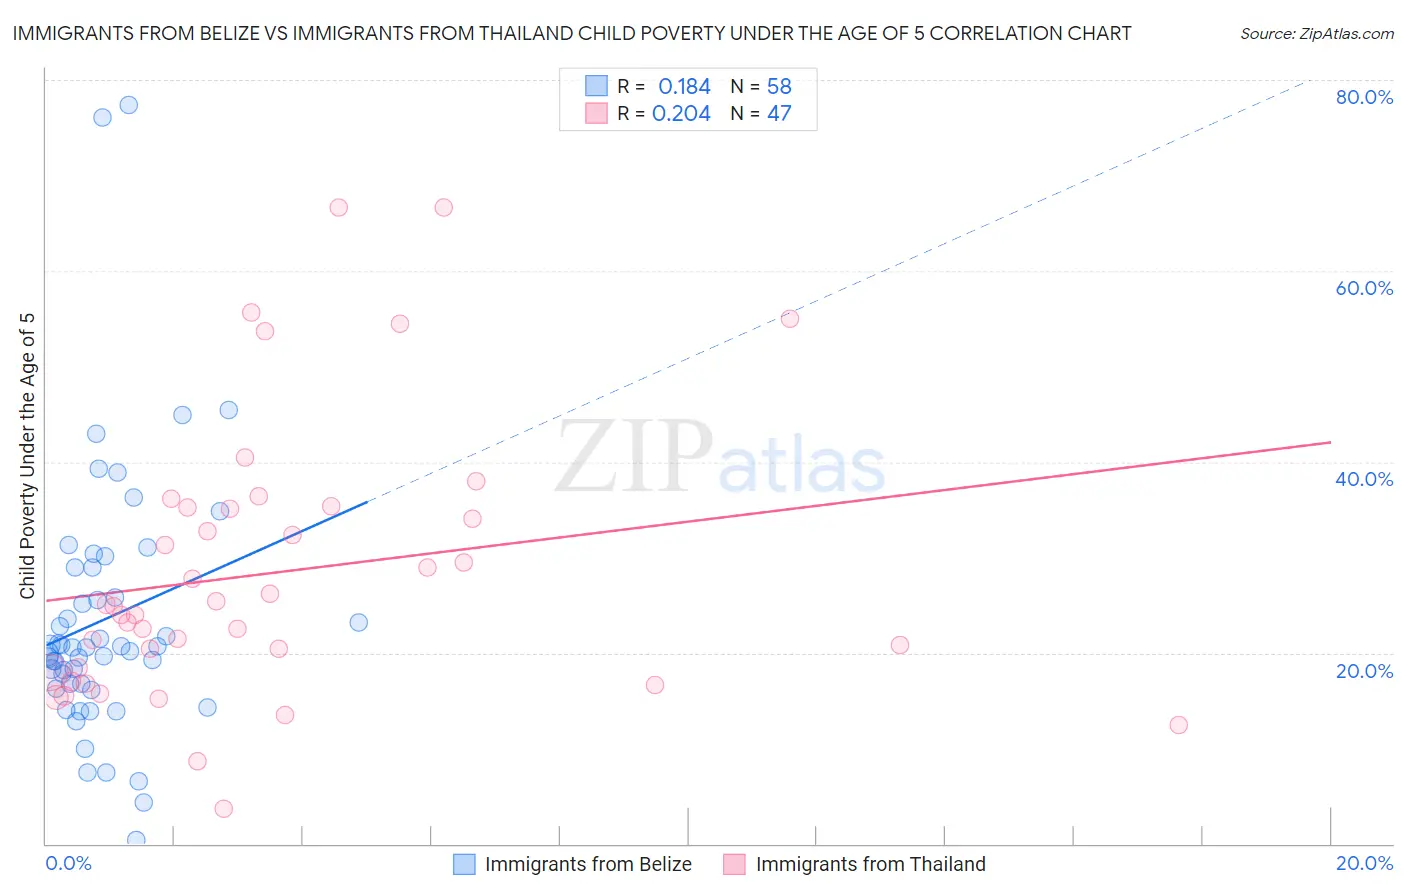 Immigrants from Belize vs Immigrants from Thailand Child Poverty Under the Age of 5